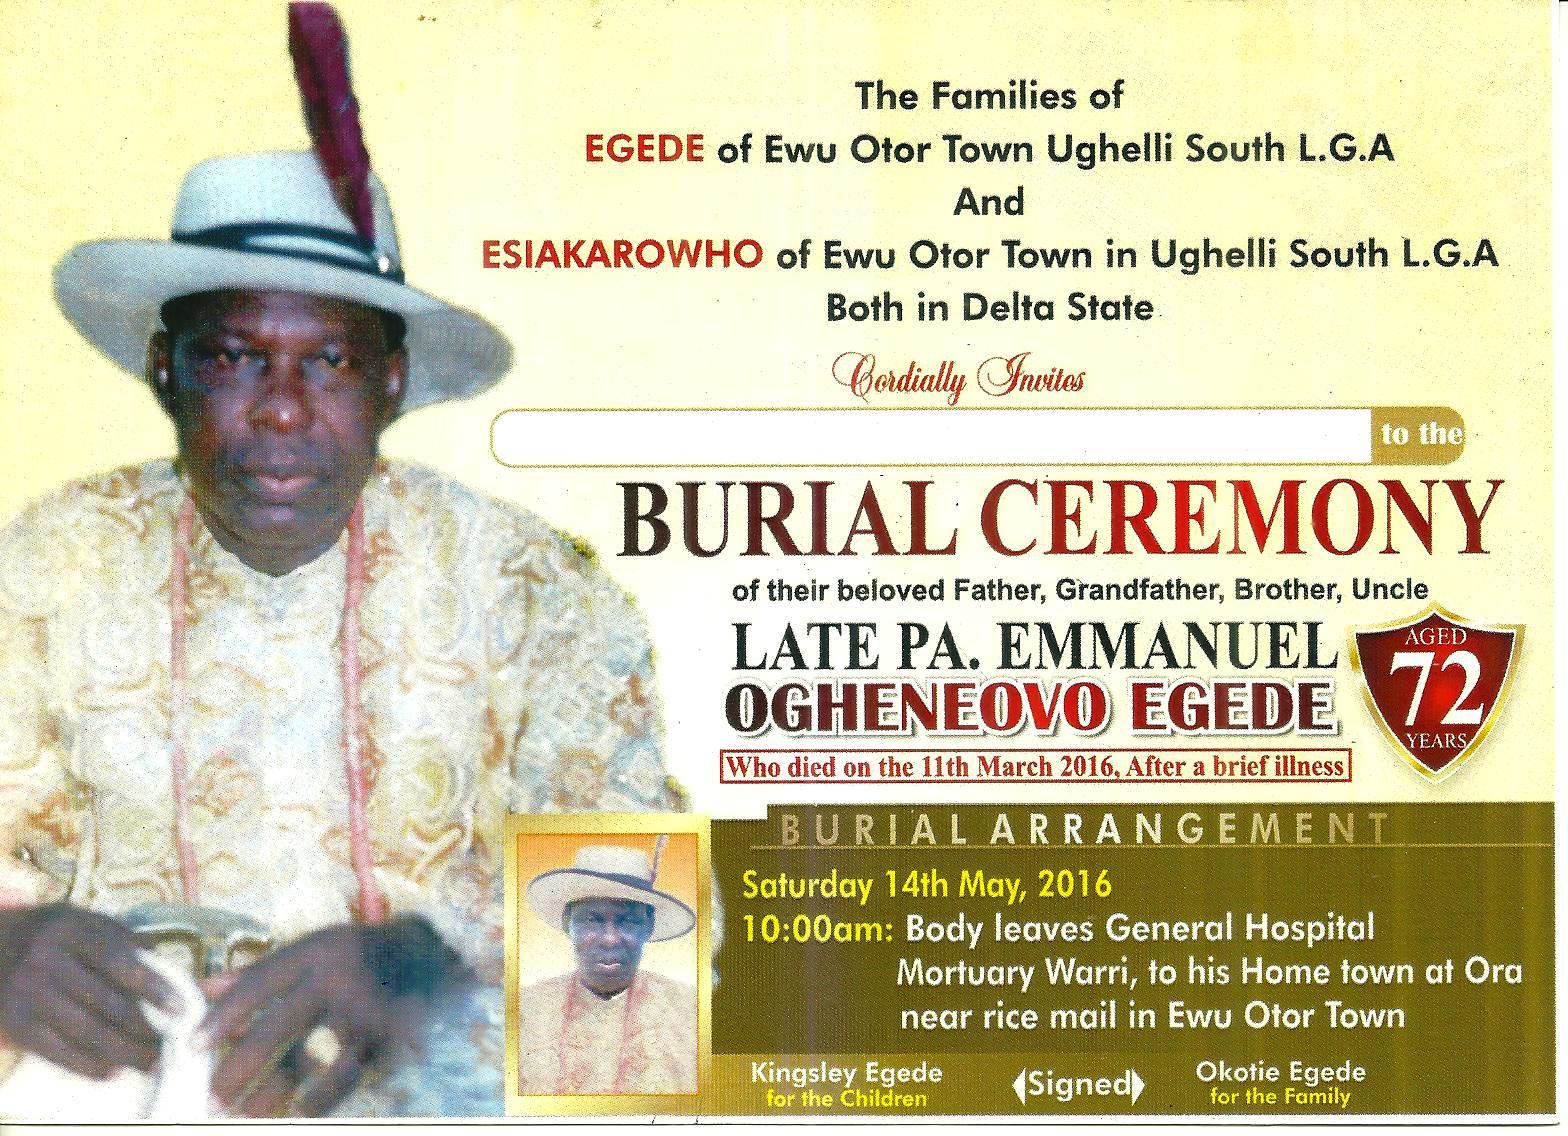 Abule Father Burial Ceremony Which Comes Up On The 14th May, 2016 @ HIs Home town, Ora near Rice Mail in Ewu Otor Town in Ughelli SOuth L.G.A.